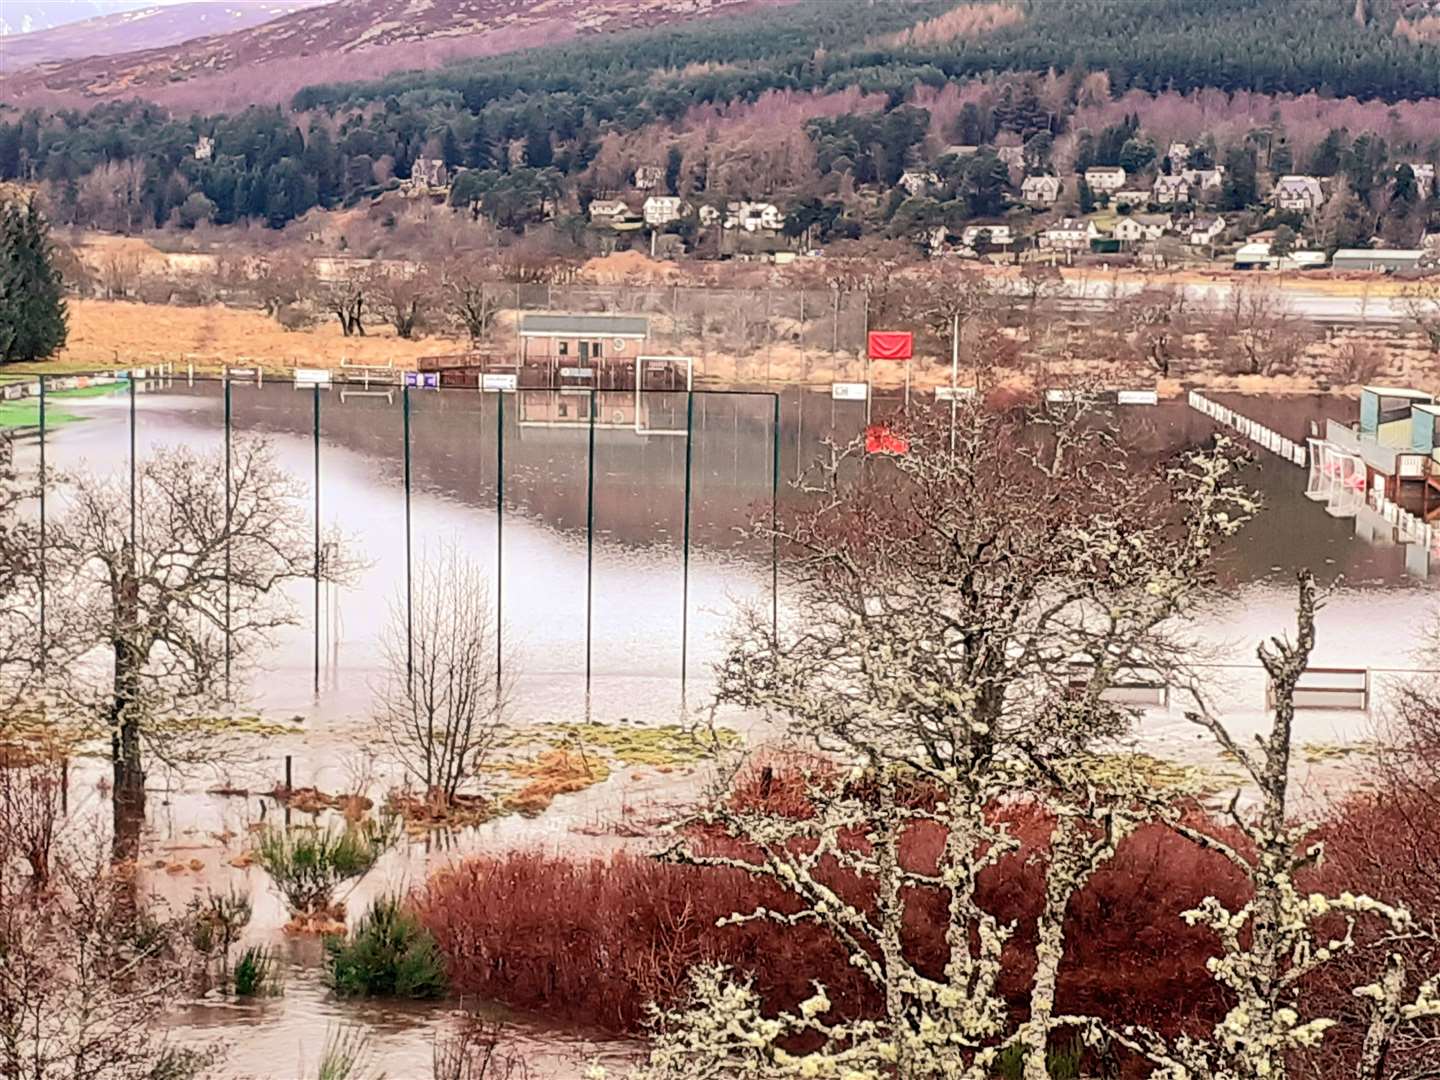 Rain stopped play at Kingussie for ScotRail